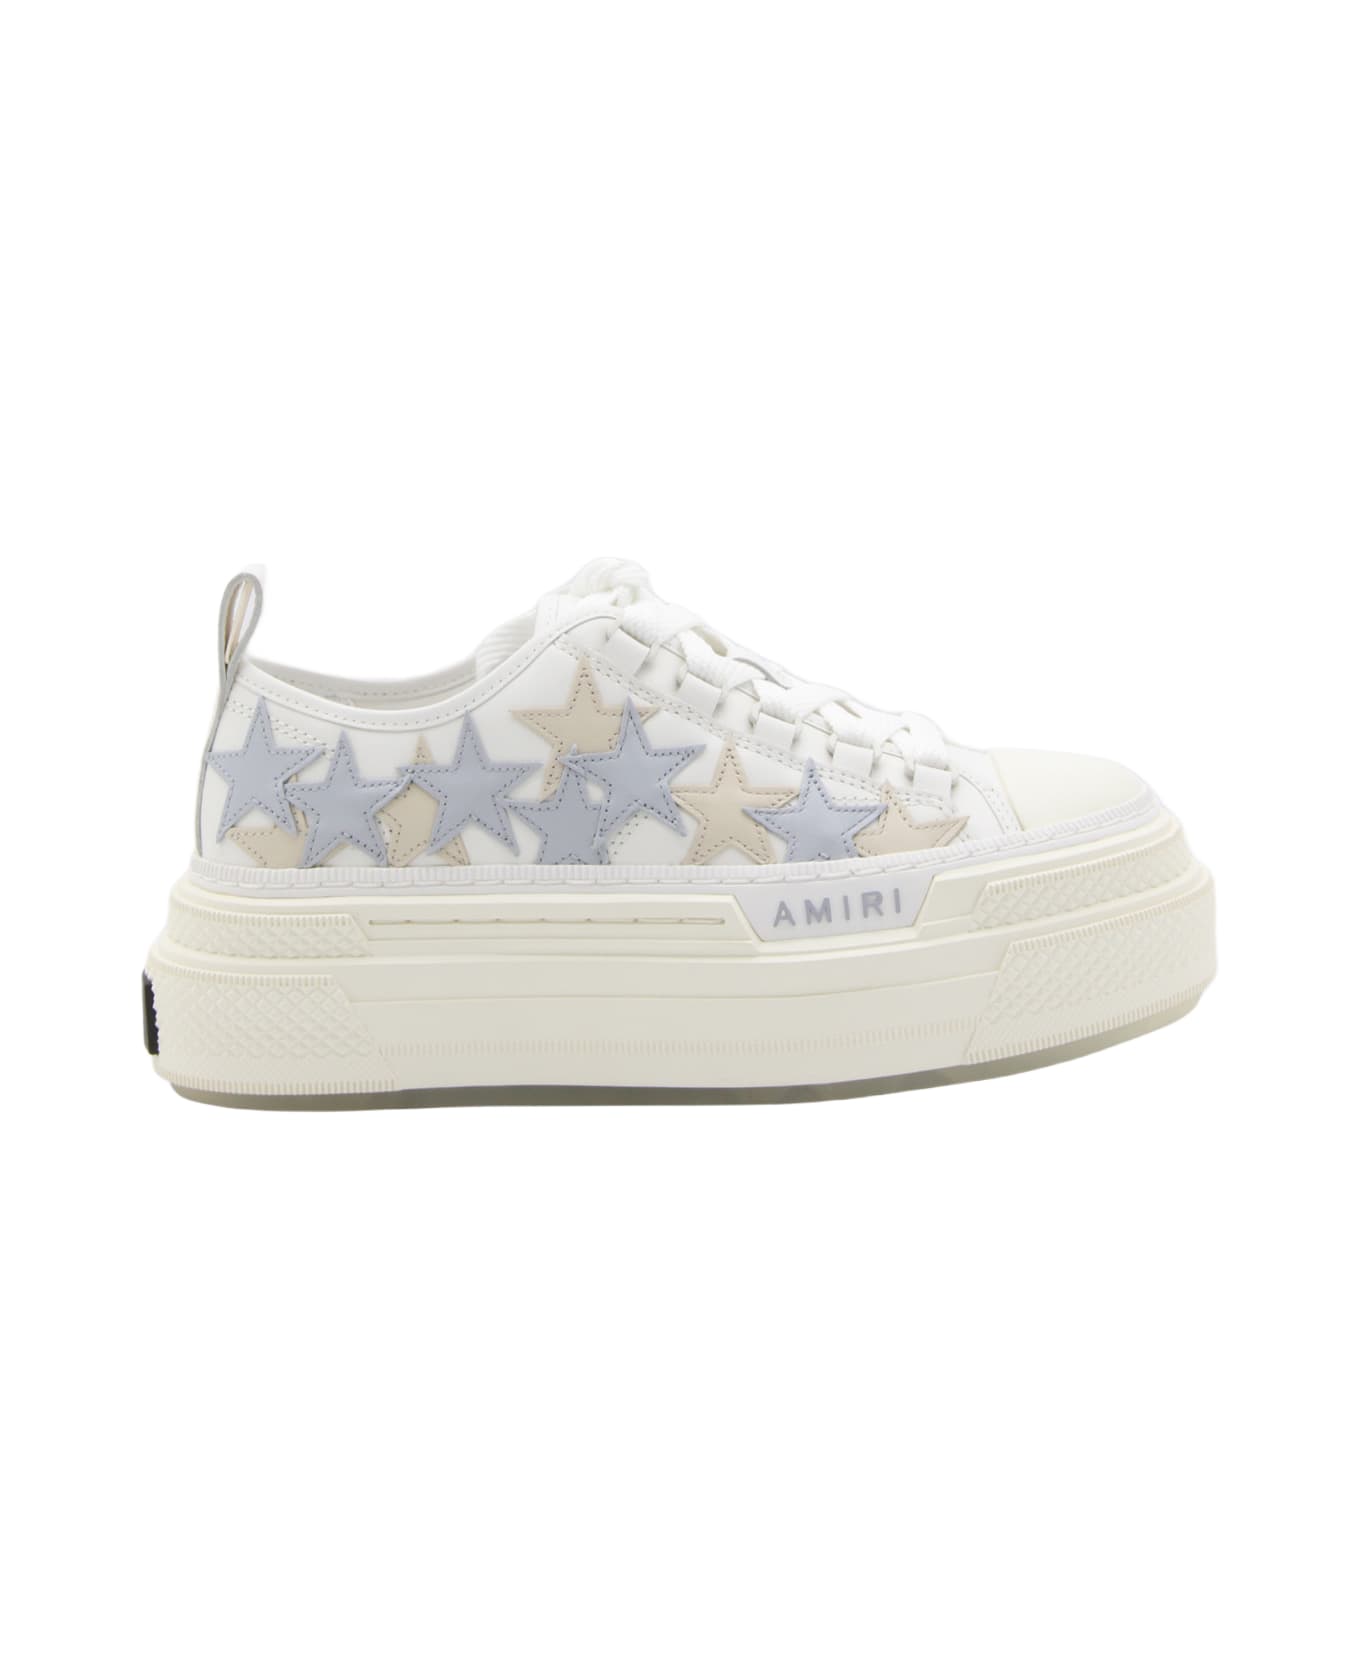 AMIRI White And Blue Leather Sneakers - GREY BLUE ウェッジシューズ